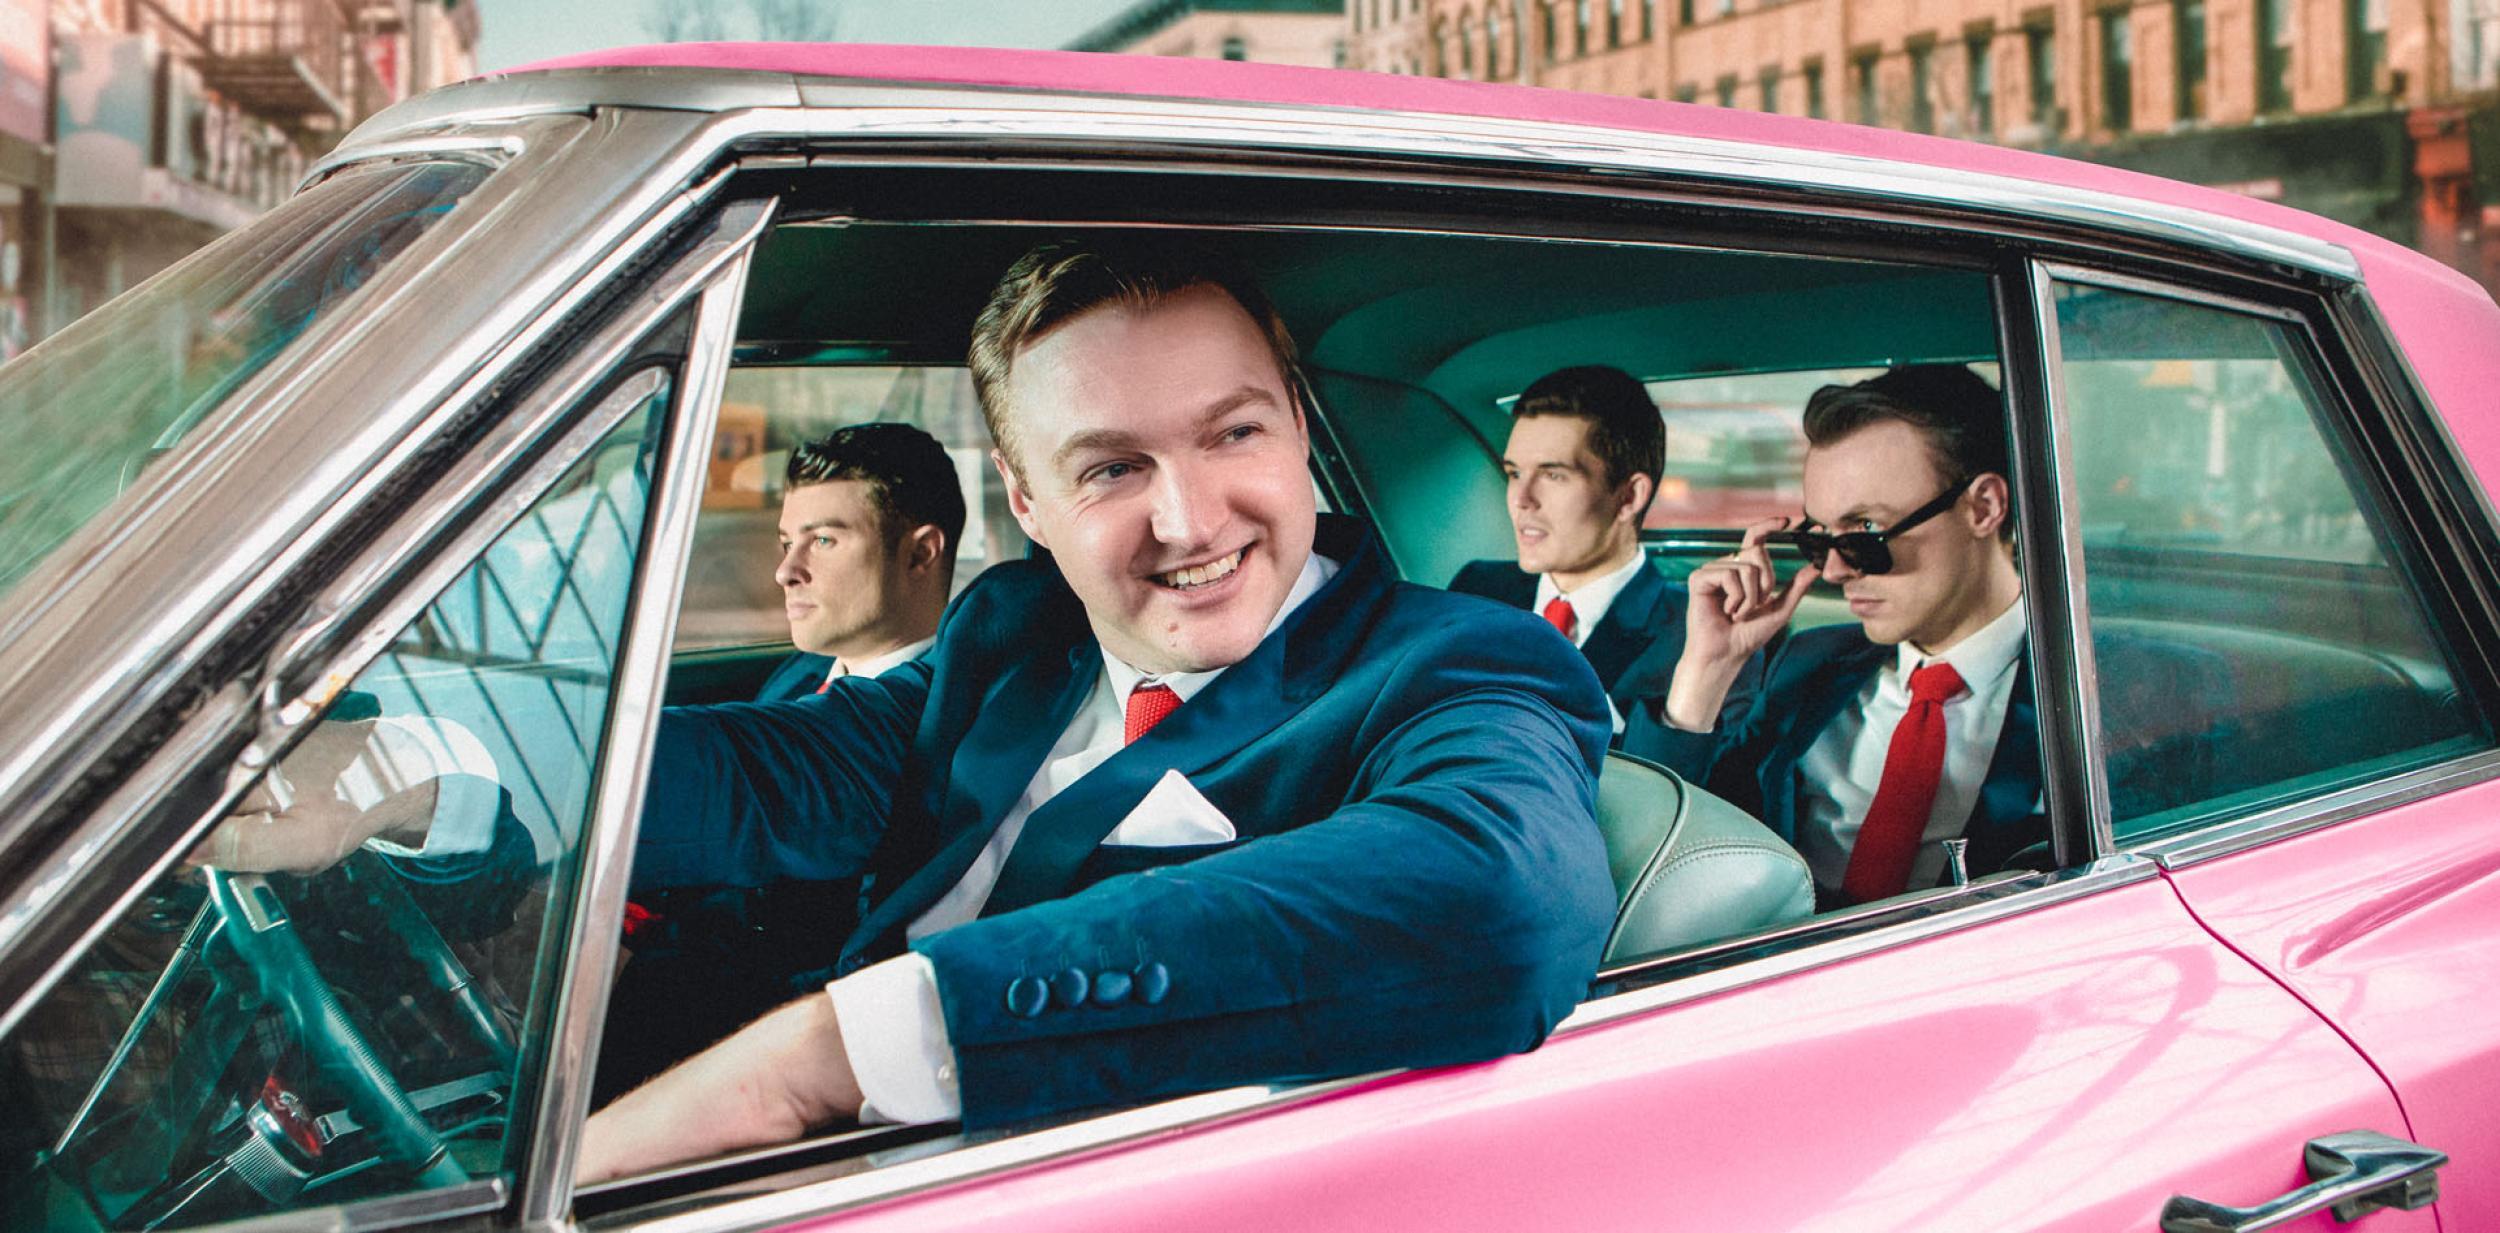 4 men in retro suits in a pink cadillac